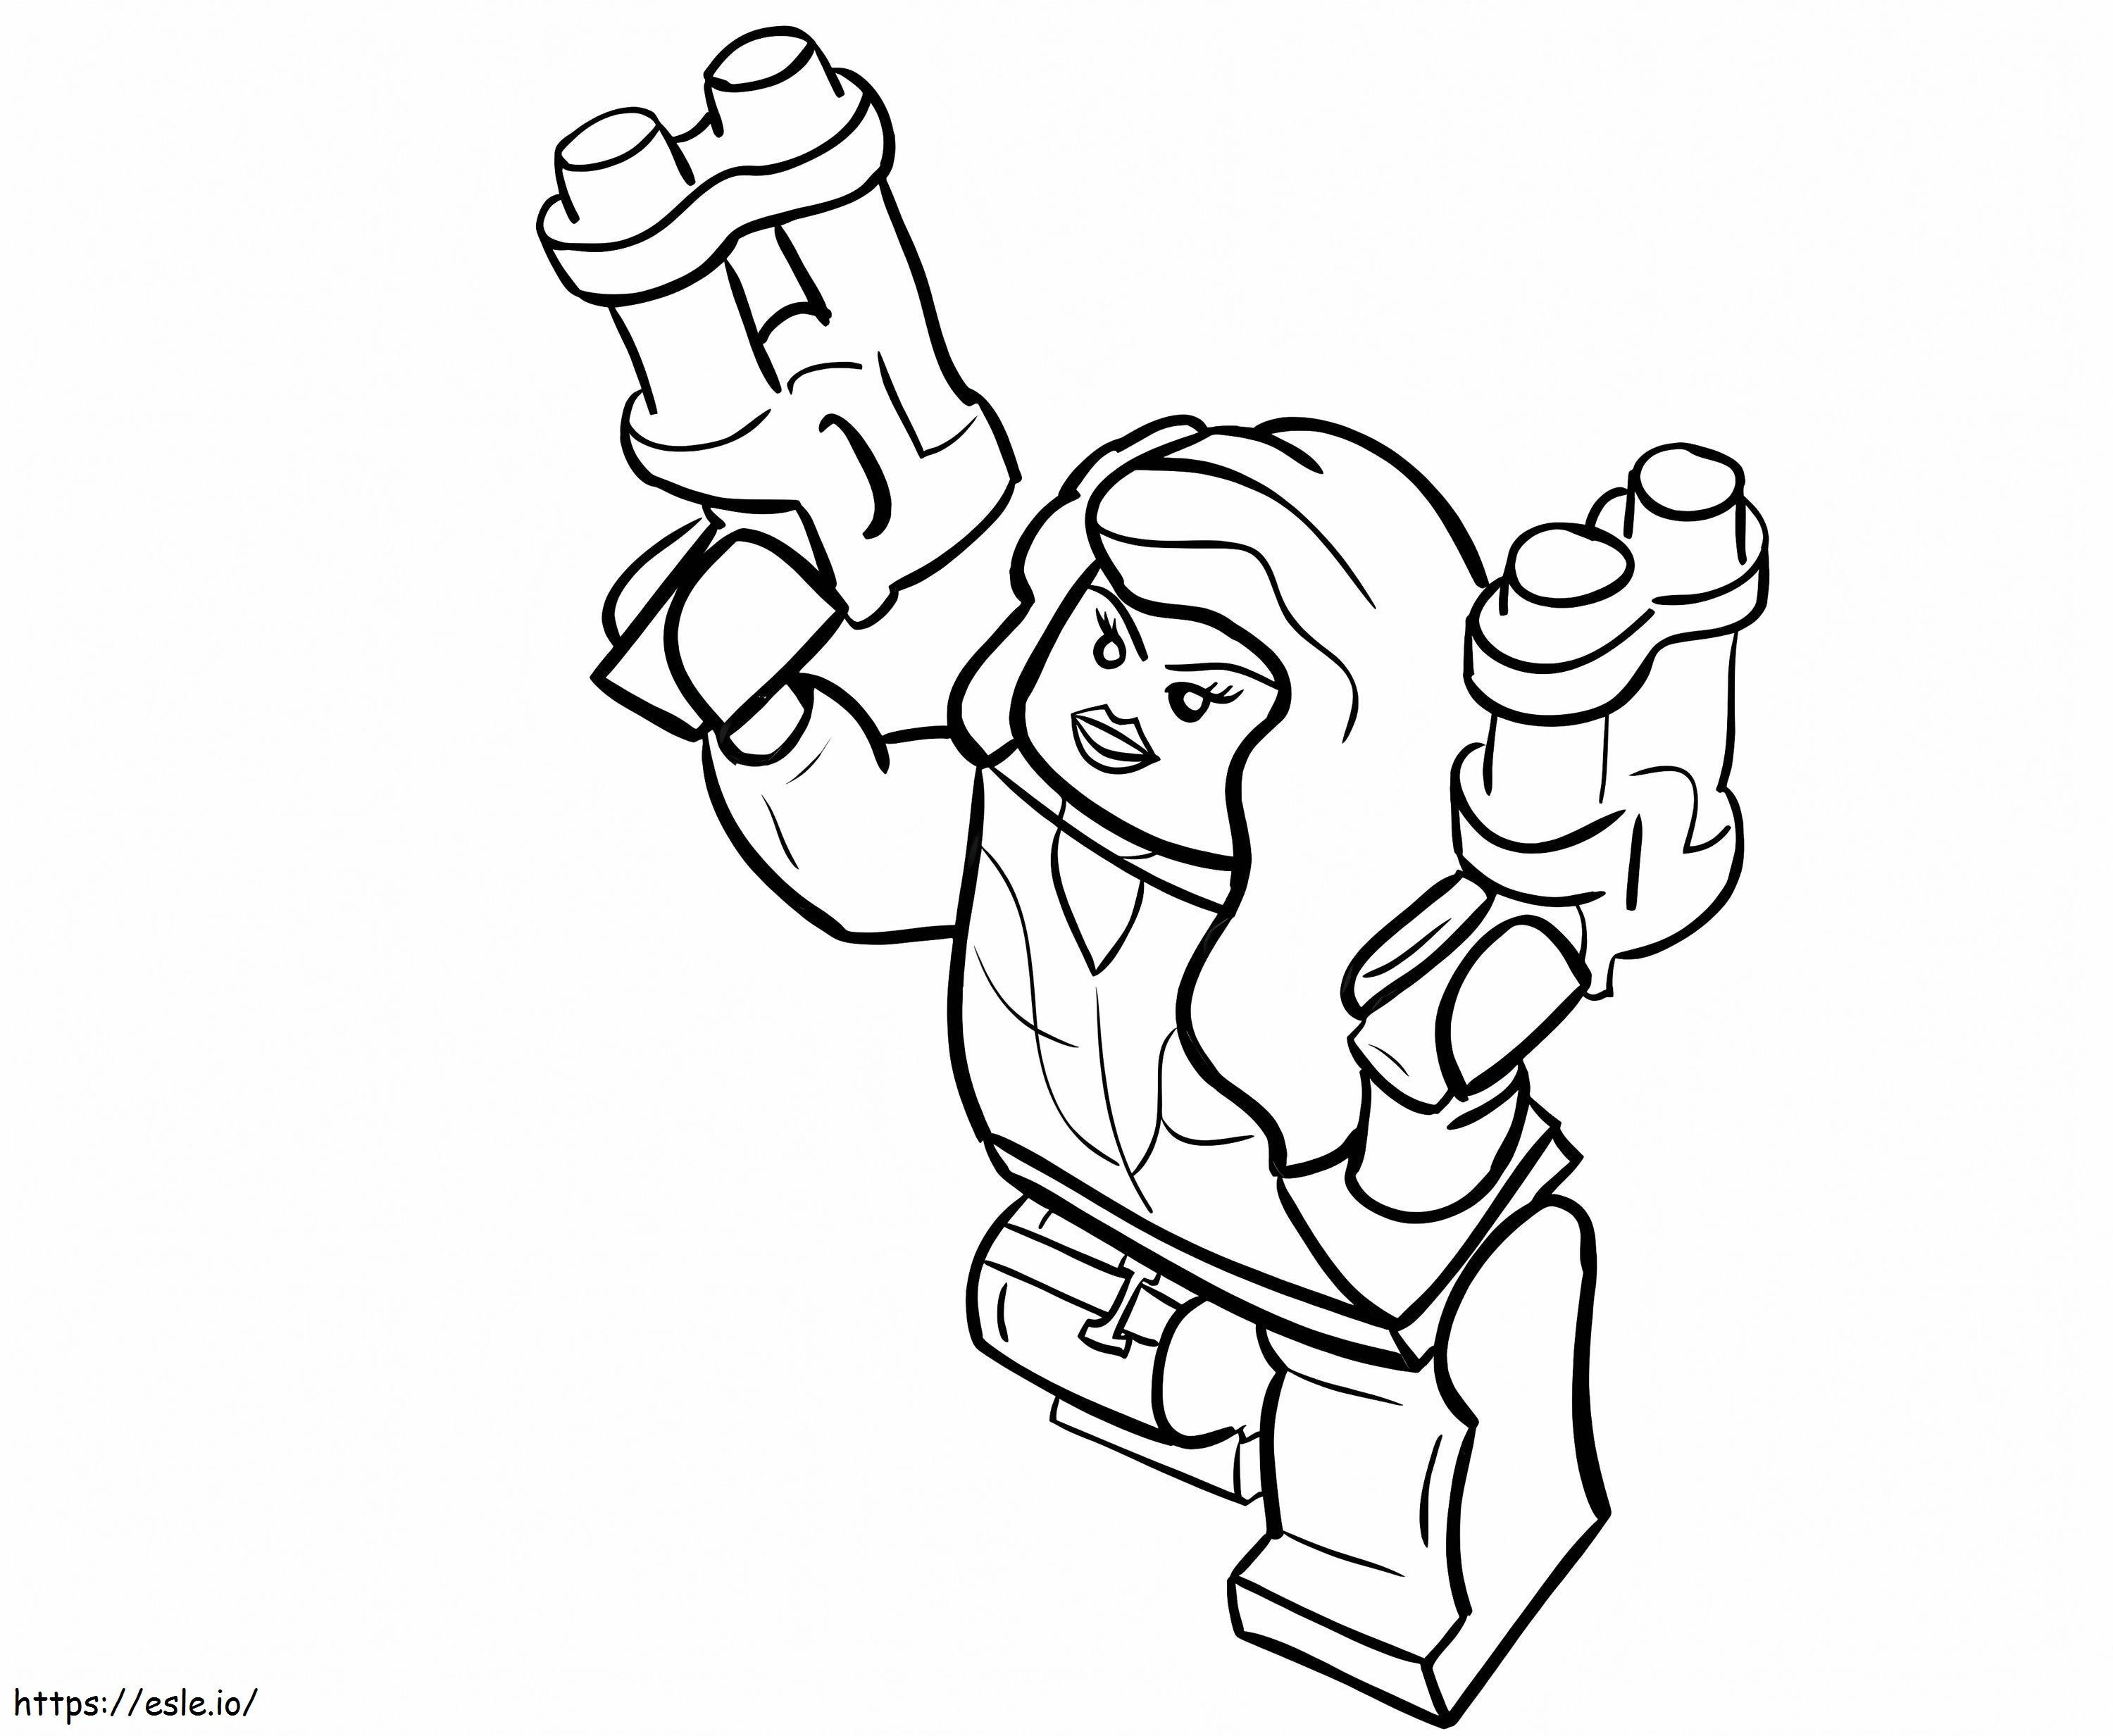 Lego Black Widow coloring page